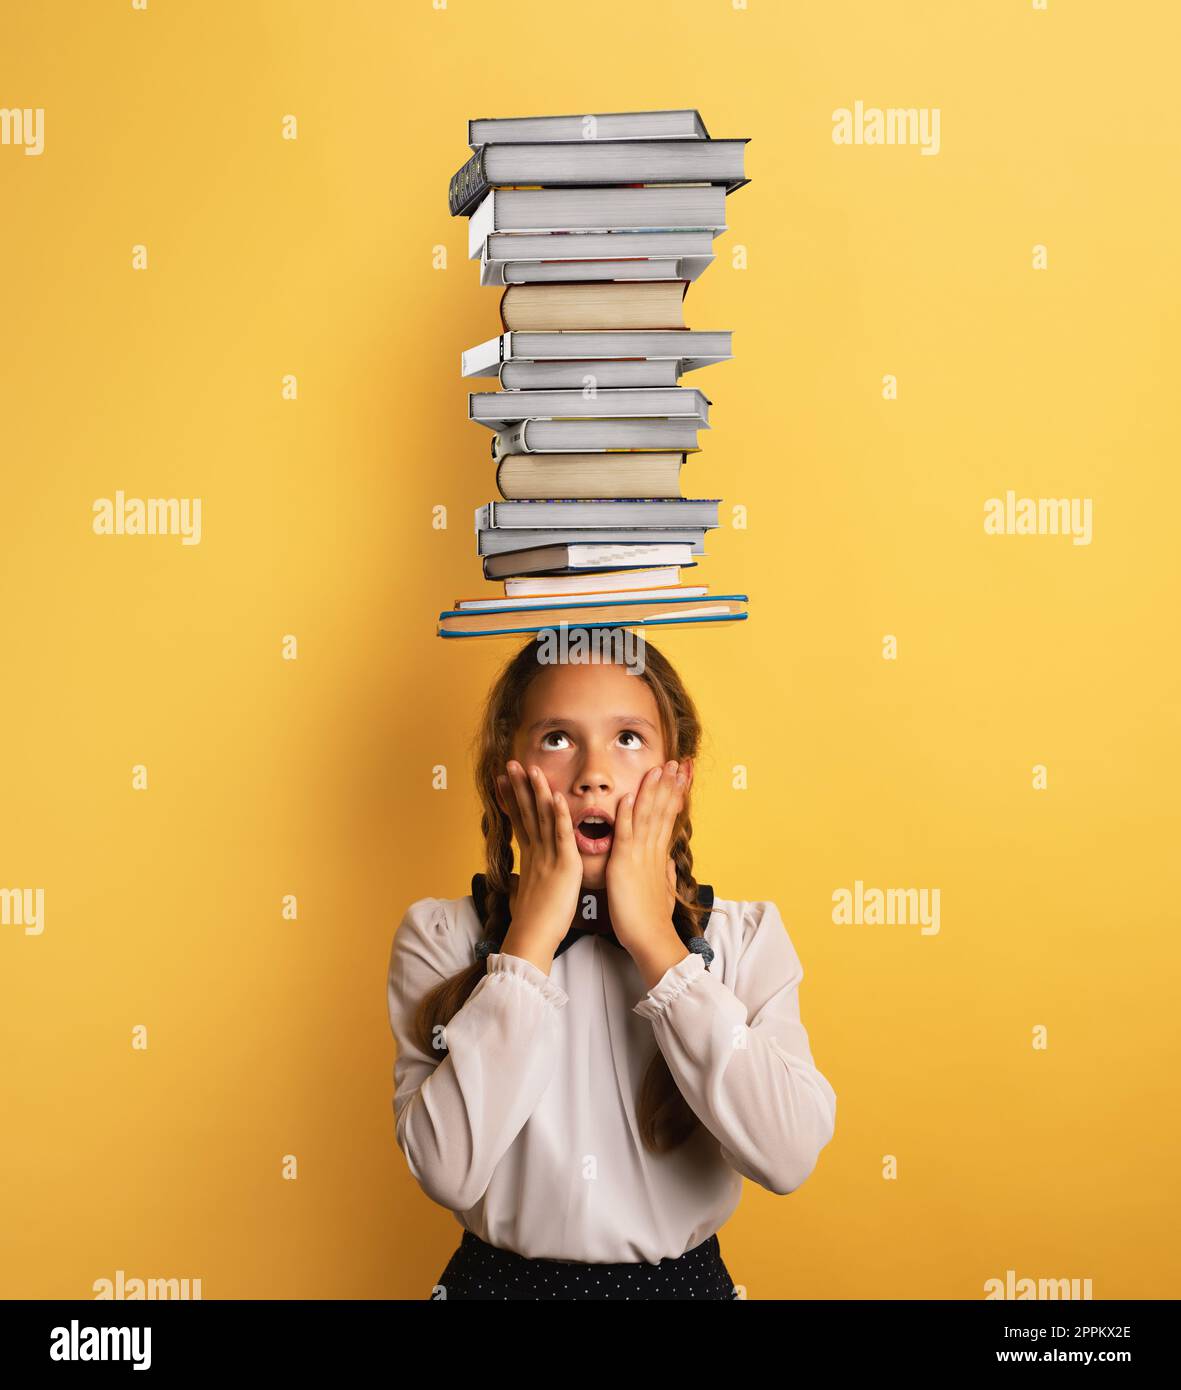 Young child student worried due to too much books to read and study. Yellow background Stock Photo